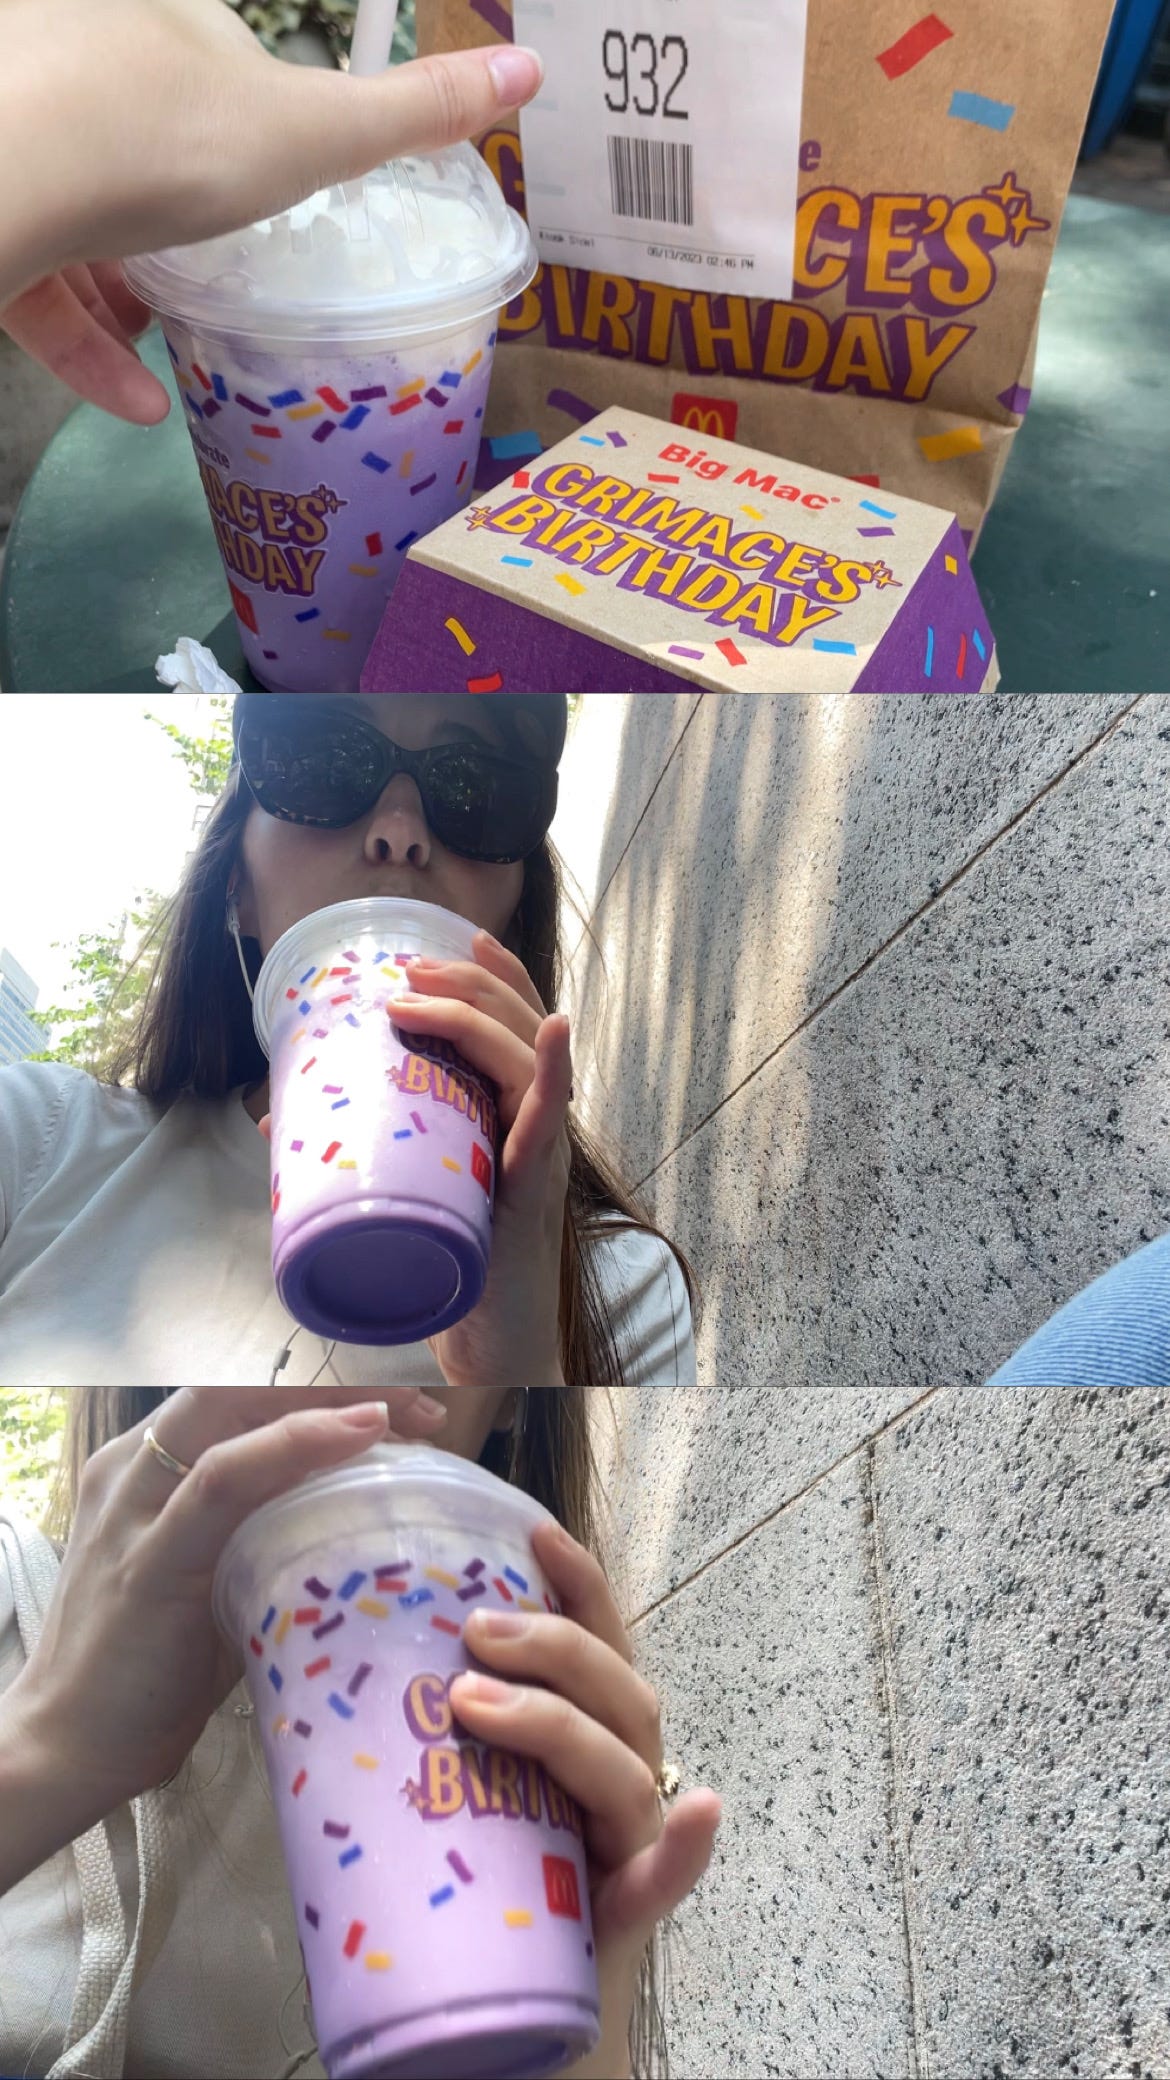 I tried the Grimace shake 🍟 - by Emily - Feed Me